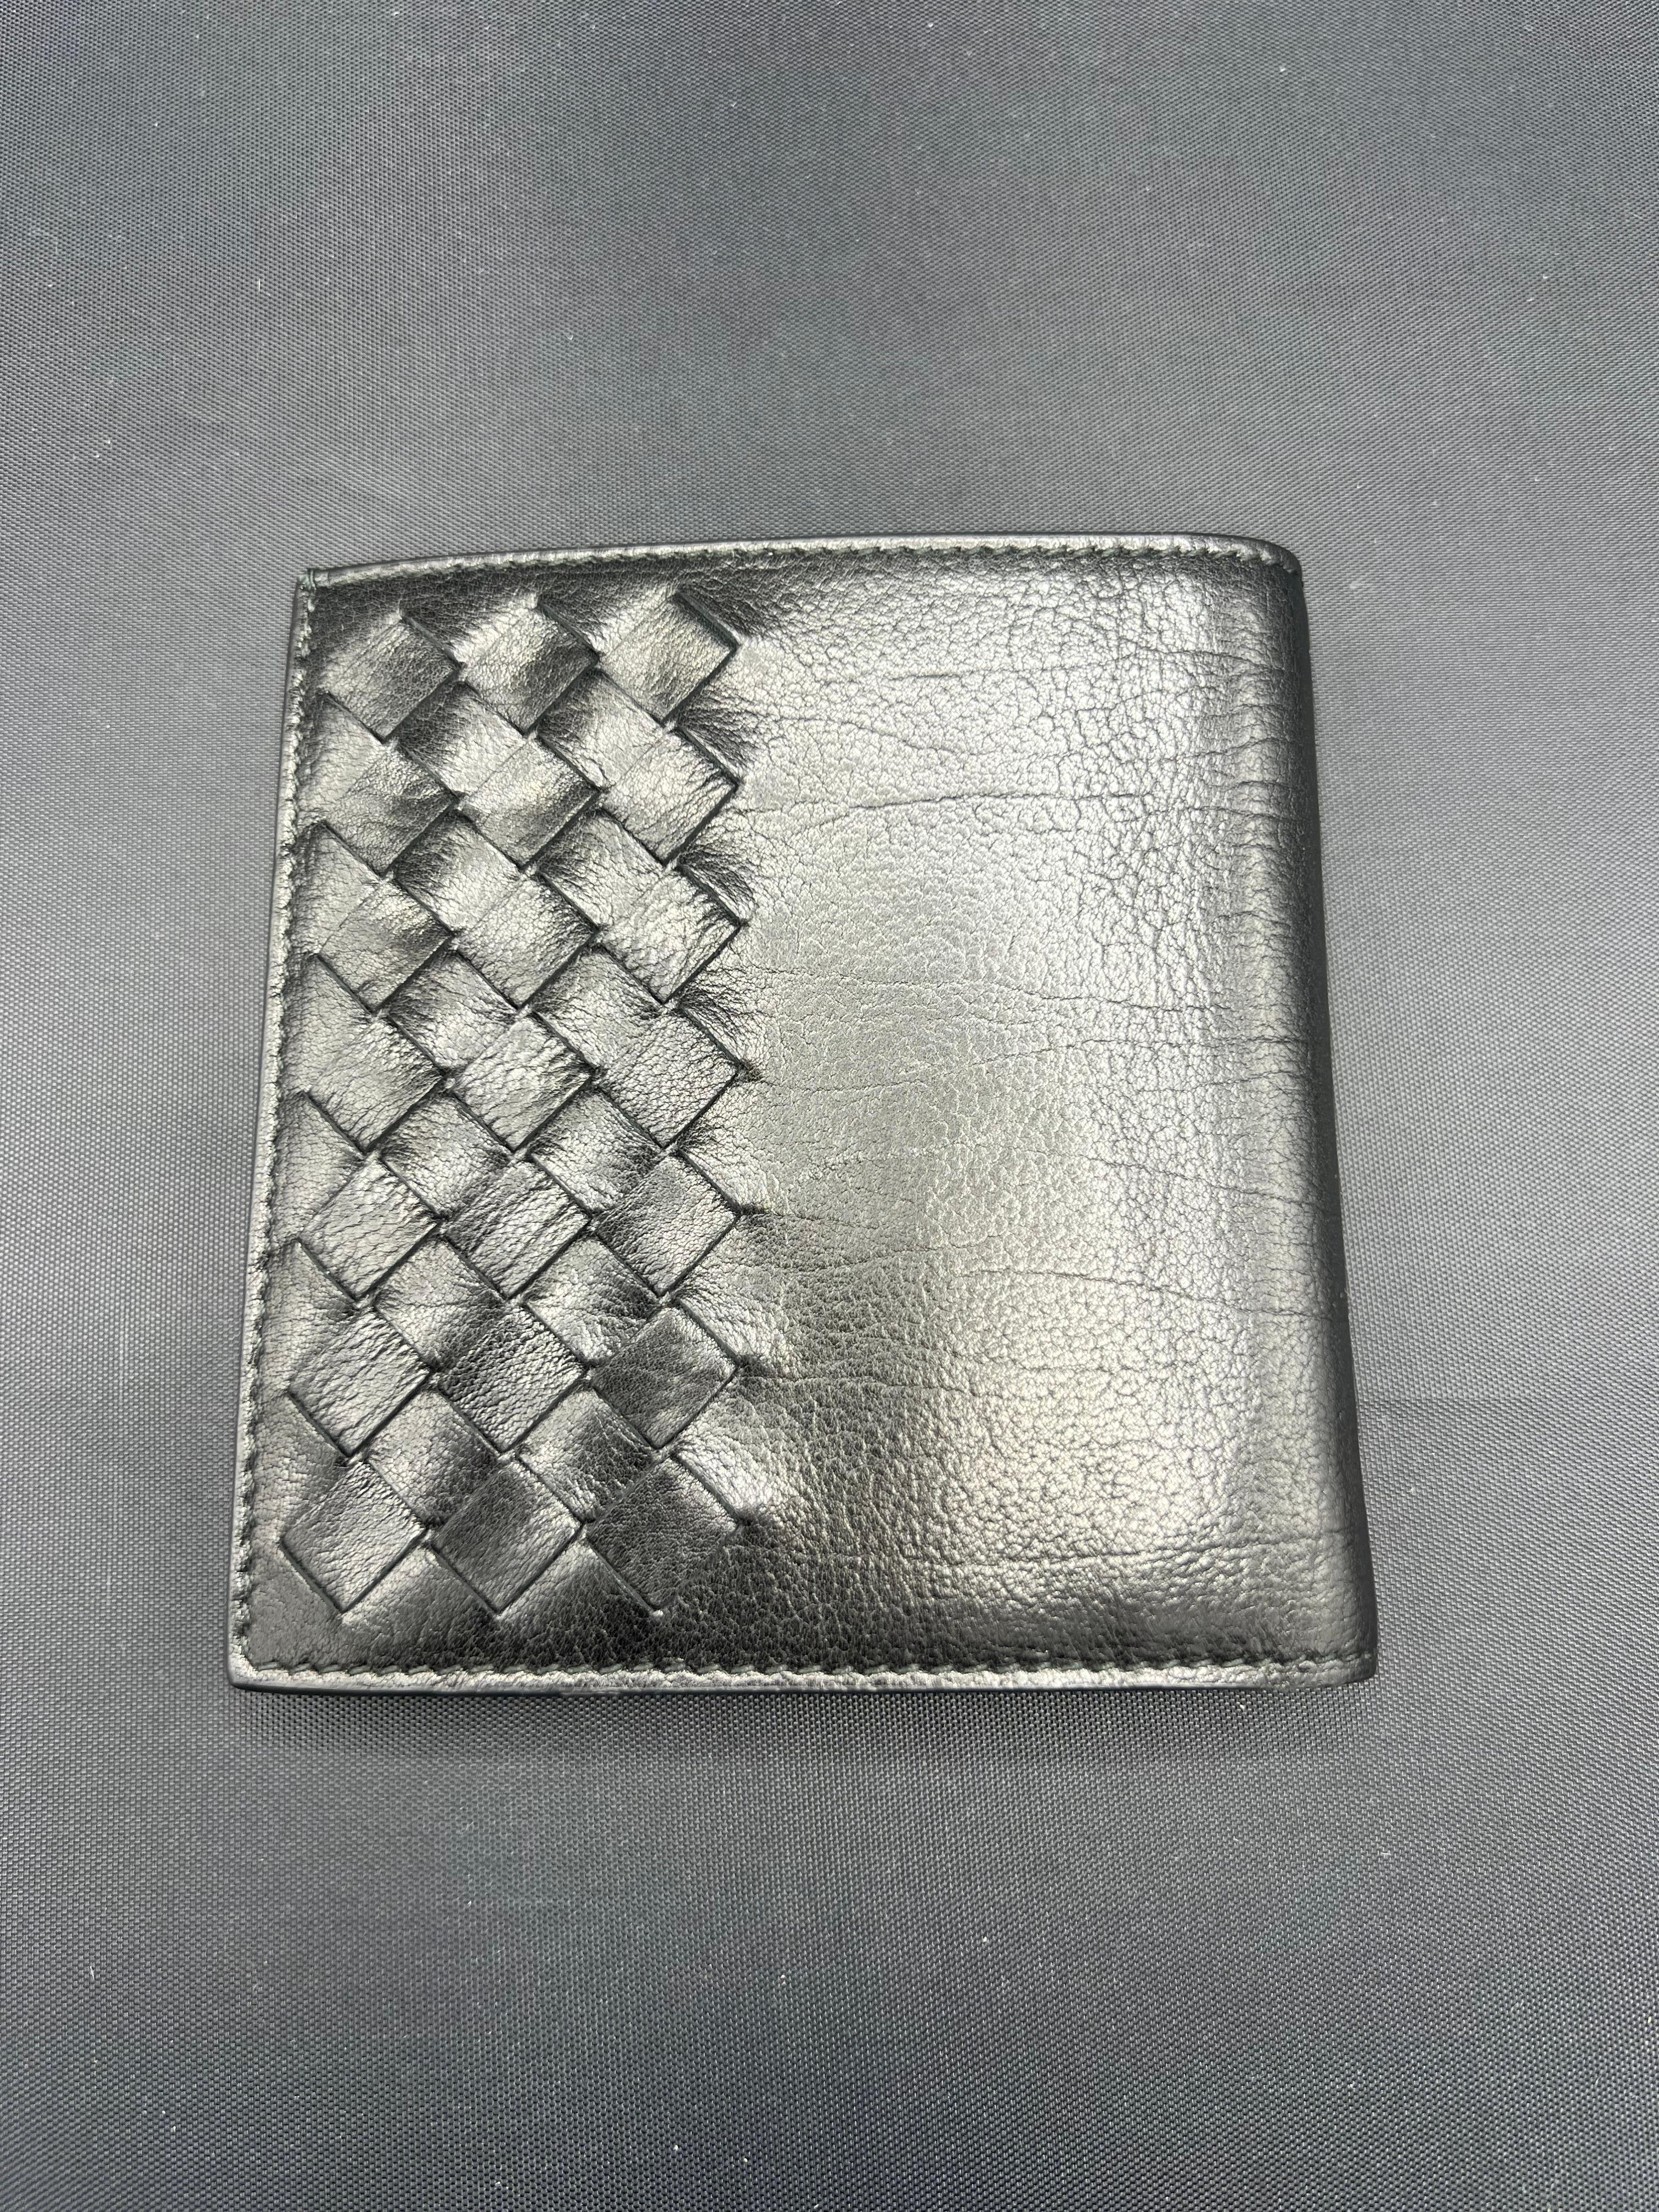 Bottega Veneta Black Leather Wallet  In Excellent Condition For Sale In Beverly Hills, CA